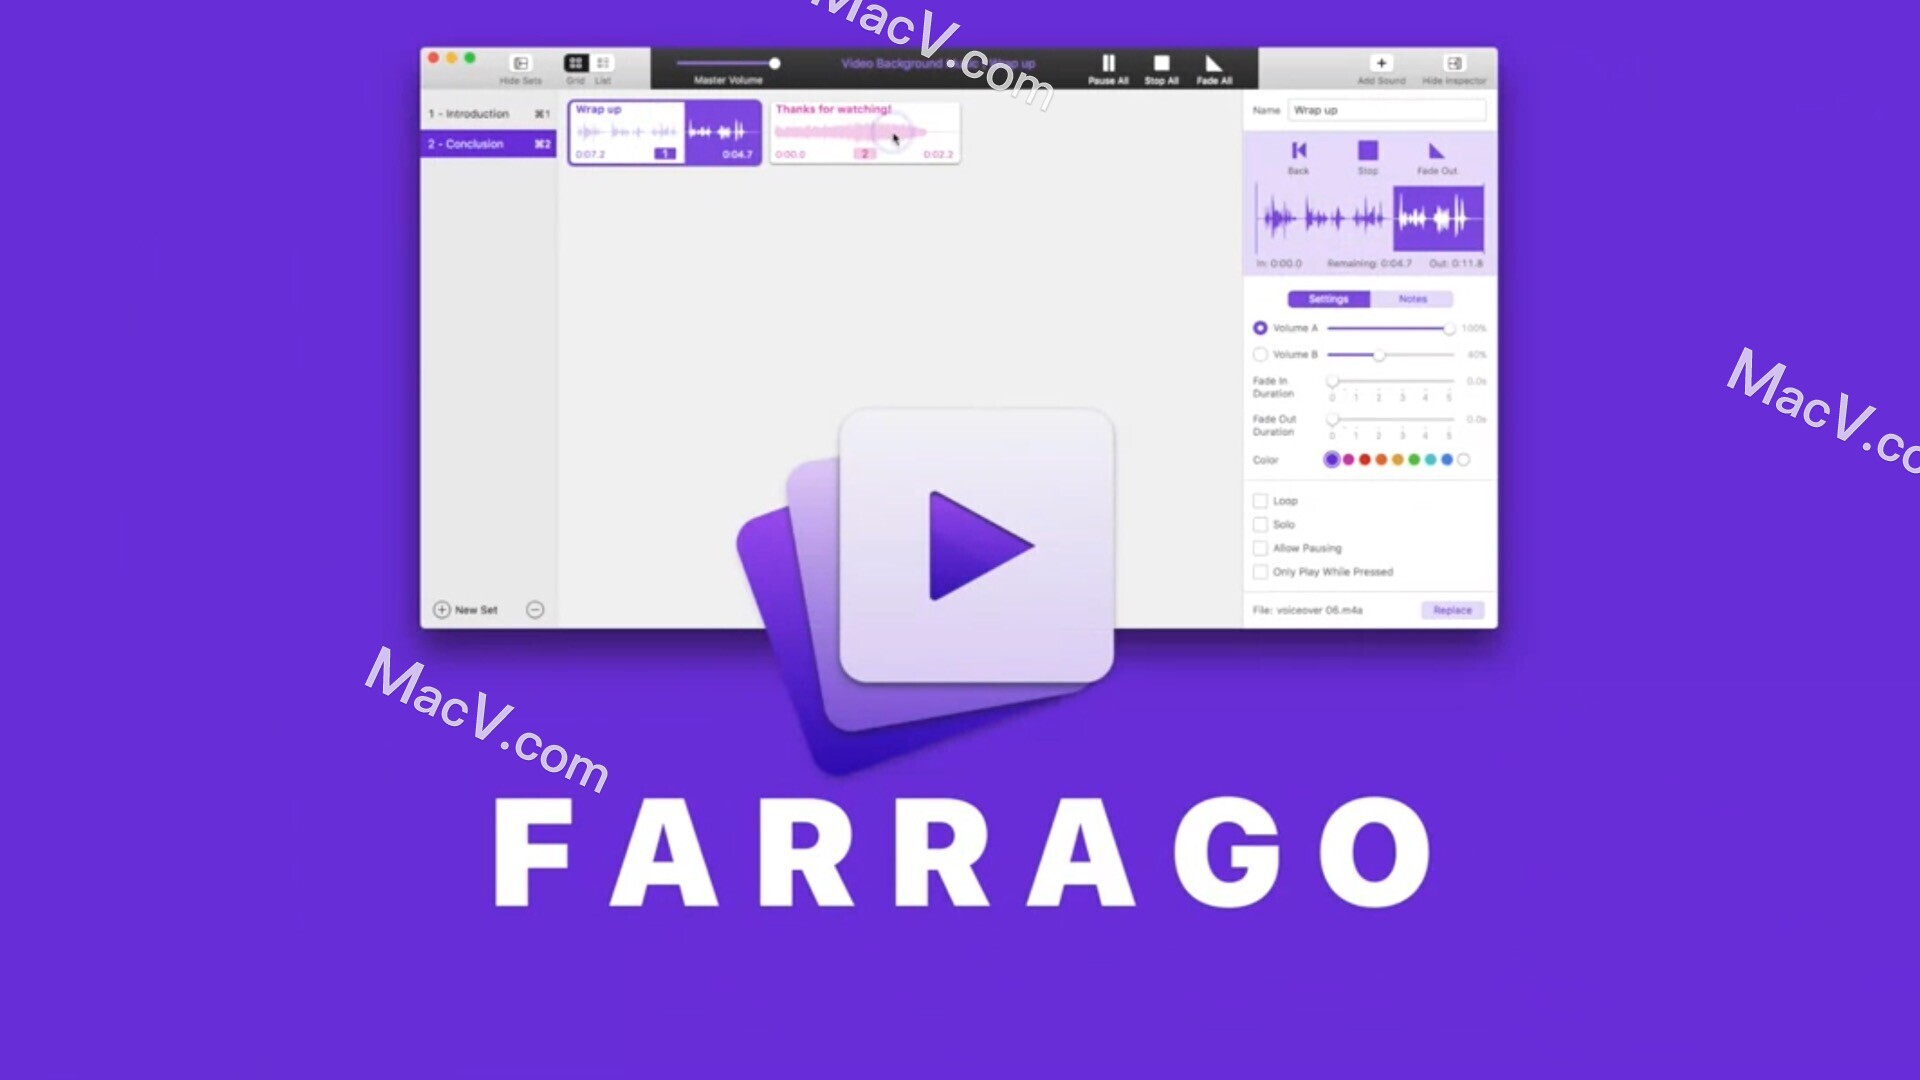 Farrago download the new version for apple